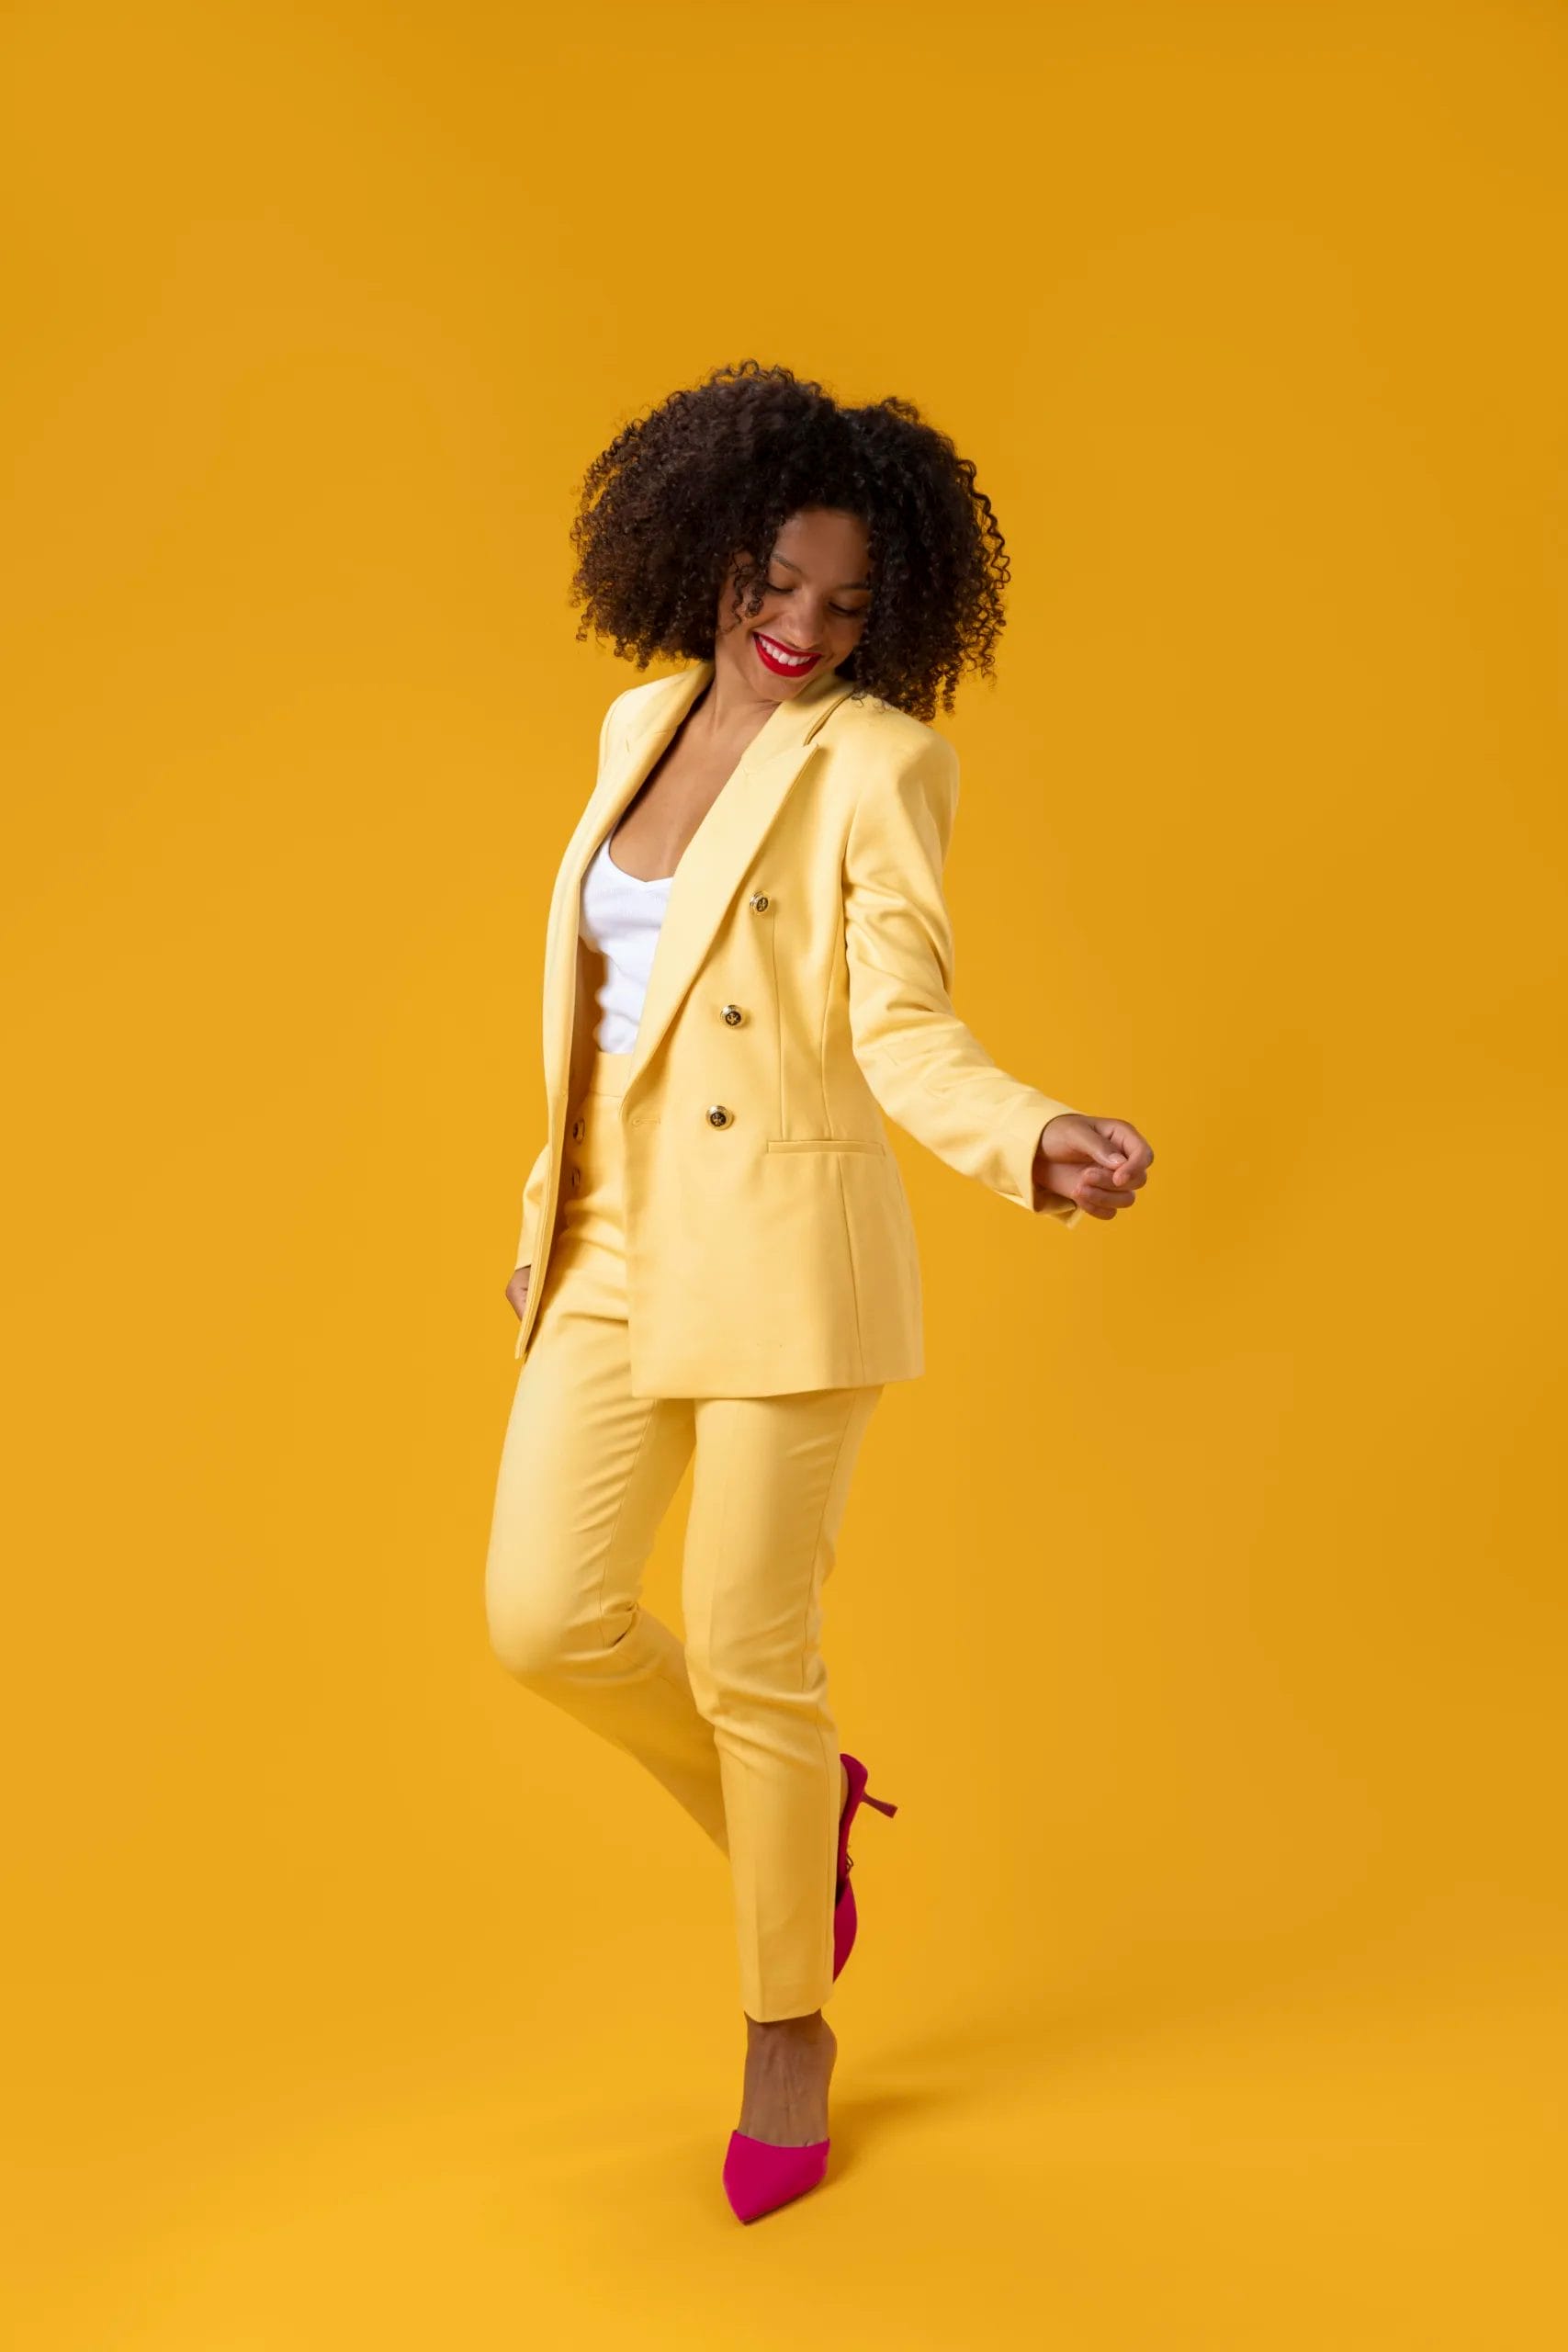 full-shot-woman-with-yellow-suit_overcomin-career-stagnation; ;Breaking the Paradox: Overcoming Career Stagnation for Black Women; Career stagnation solutions, Overcoming career plateau, Breaking career standstill, Strategies for career advancement, Career growth after stagnation, Tips for overcoming career stagnation, Moving past career inertia, Career development after stagnation, Escaping career stagnation trap, Career progression following stagnation, Addressing career stagnation issues, Combatting career stagnation challenges, Career revitalization post-stagnation, Navigating career stagnation obstacles, Career momentum after stagnation,